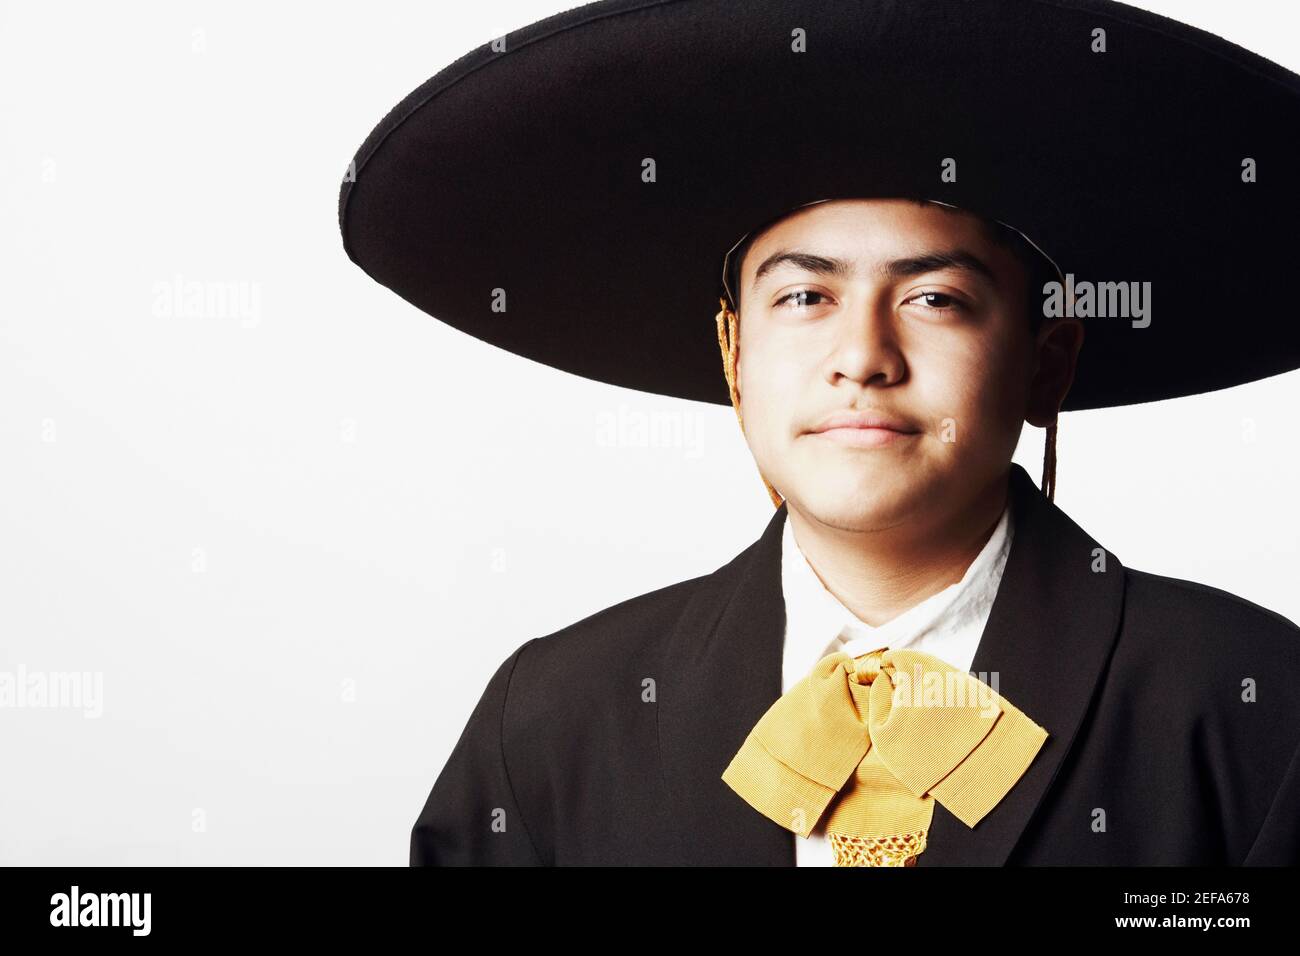 Portrait of a teenage boy in traditional clothing Stock Photo